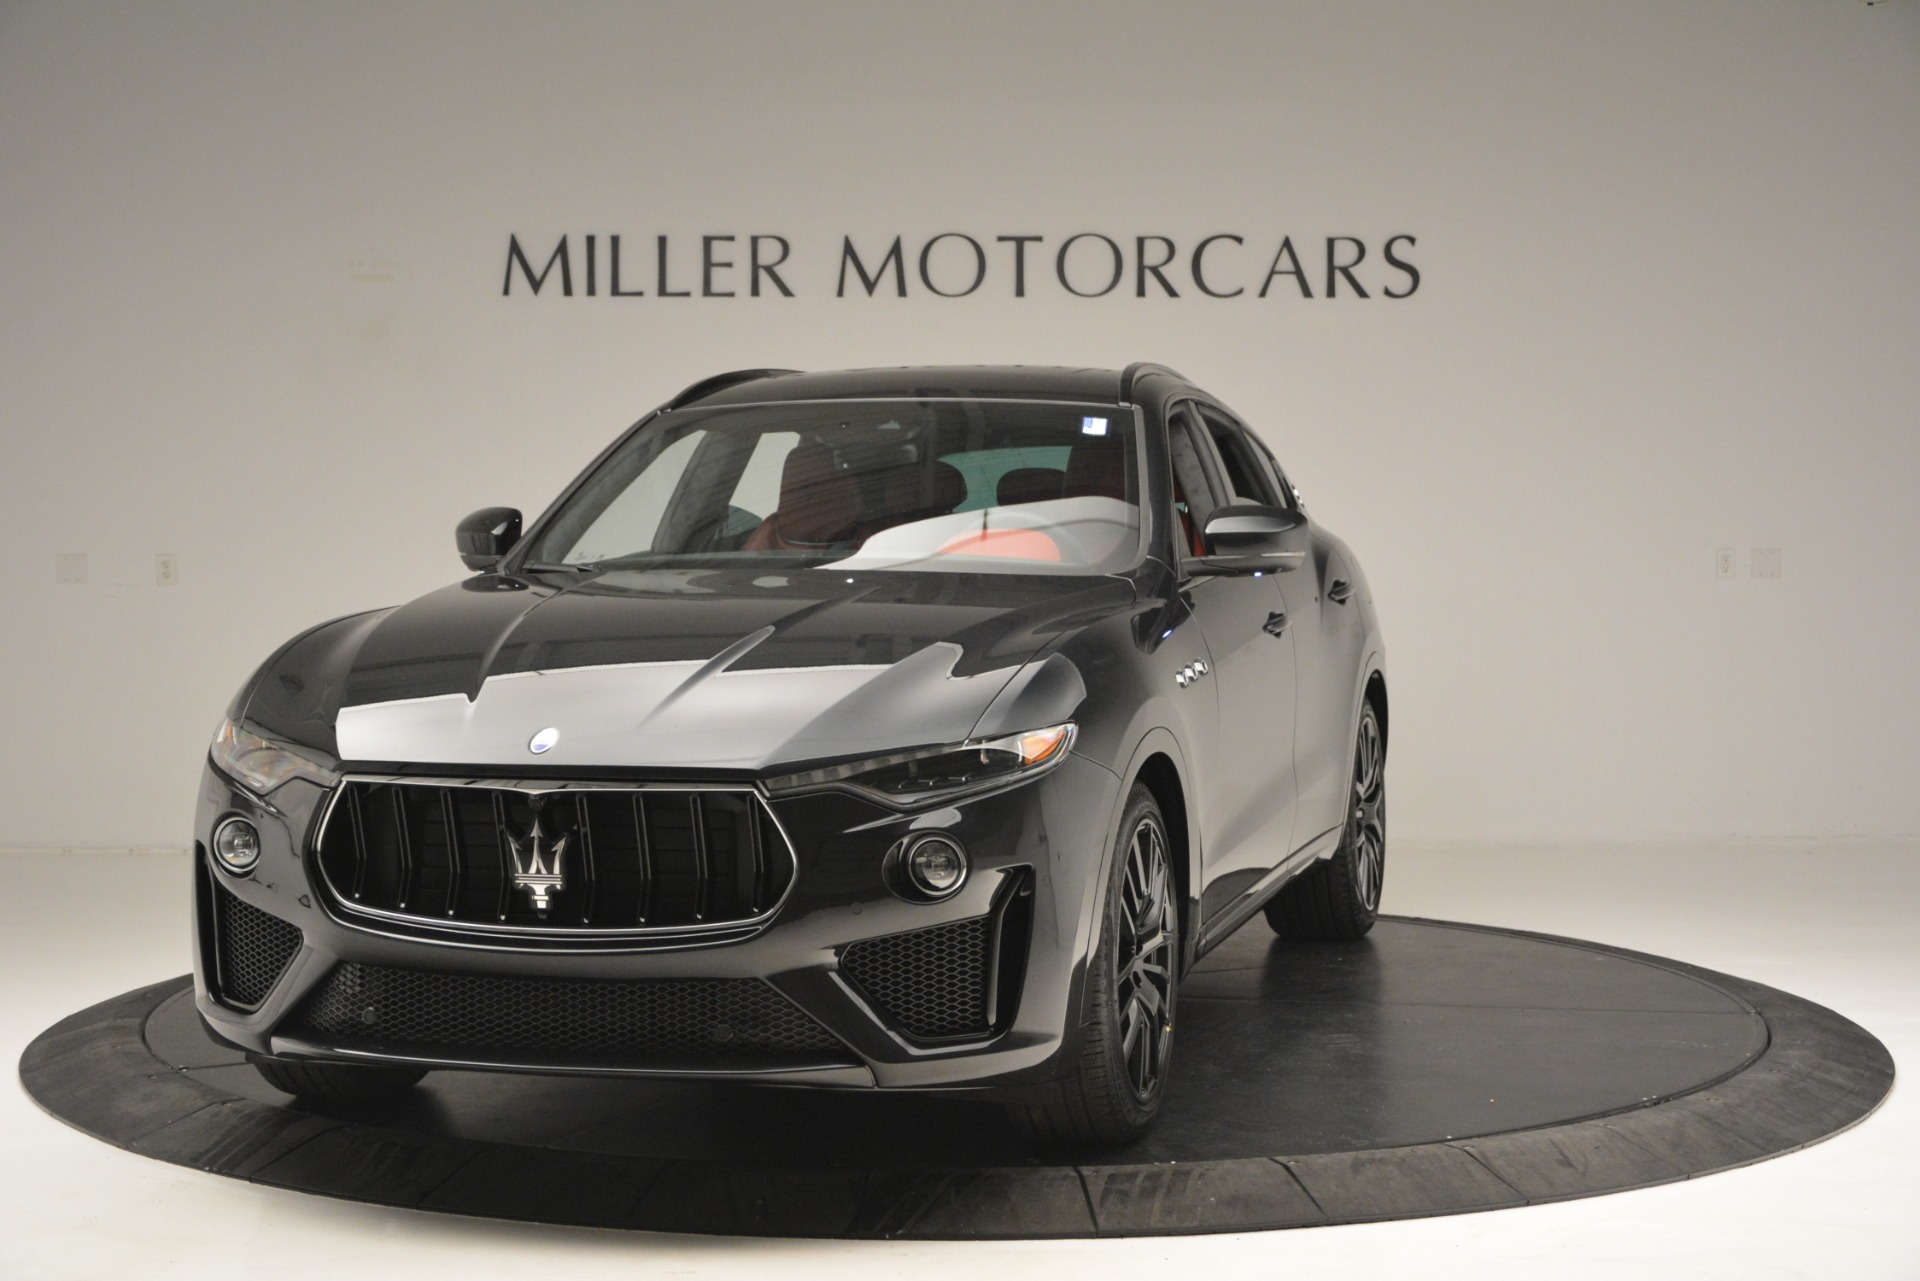 New 2019 Maserati Levante GTS for sale Sold at Bentley Greenwich in Greenwich CT 06830 1